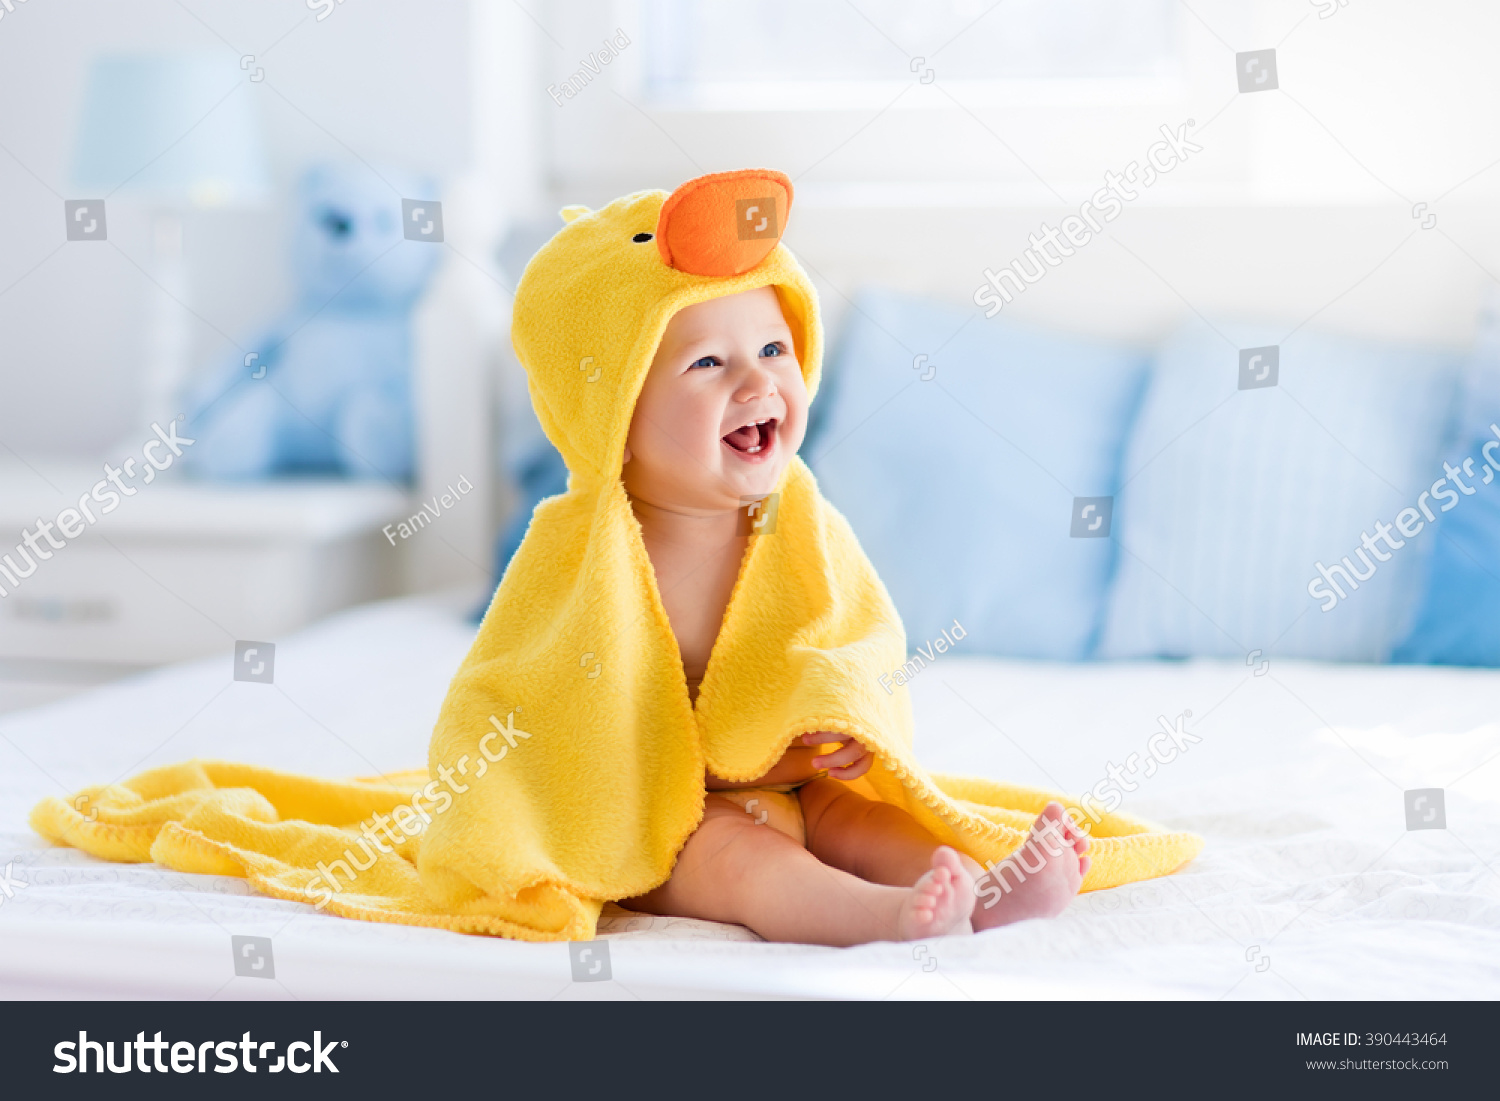 Happy laughing baby wearing yellow hooded duck towel sitting on parents bed after bath or shower. Clean dry child in bedroom. Bathing and washing of little kids. Children hygiene. Textile for infants. #390443464